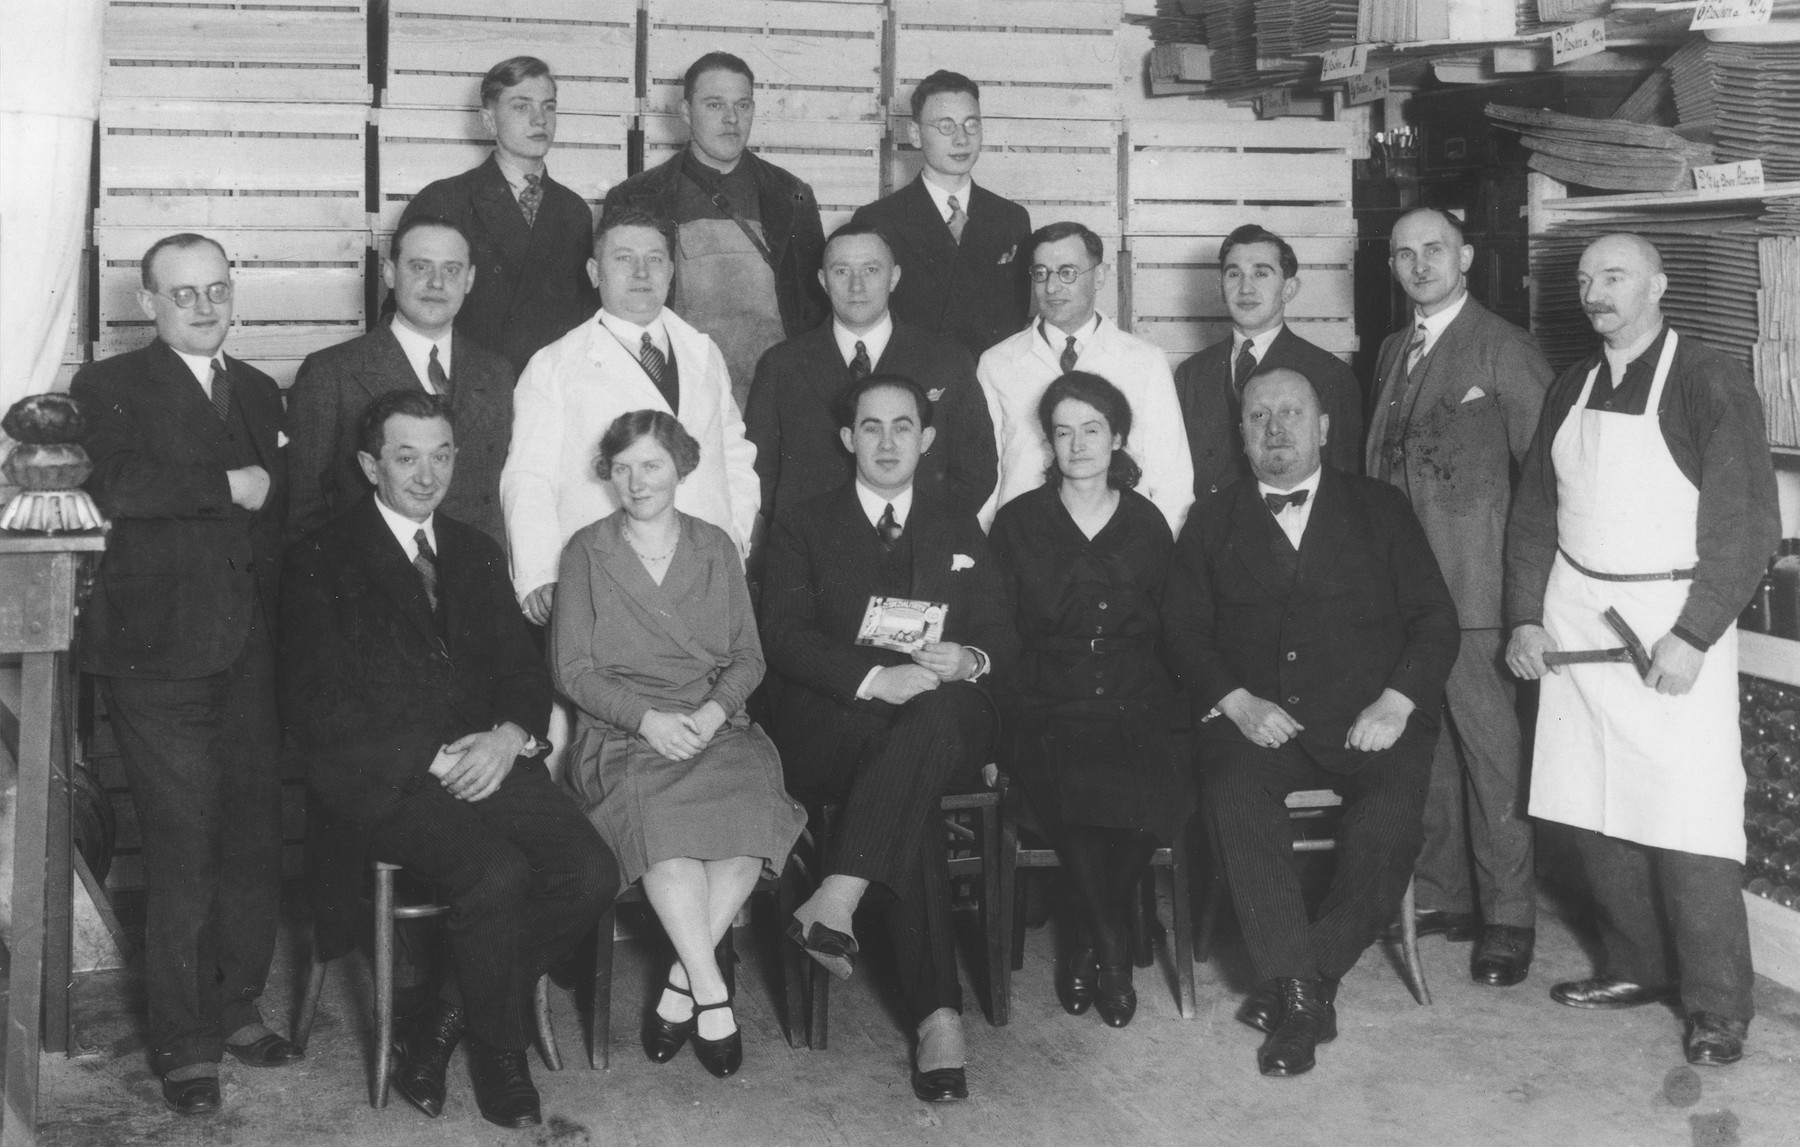 Group portrait of the employees of a business where Cecil Gelbart worked as a chemist.

Cecil Gelbart is standing in the middle row, fourth from the right.